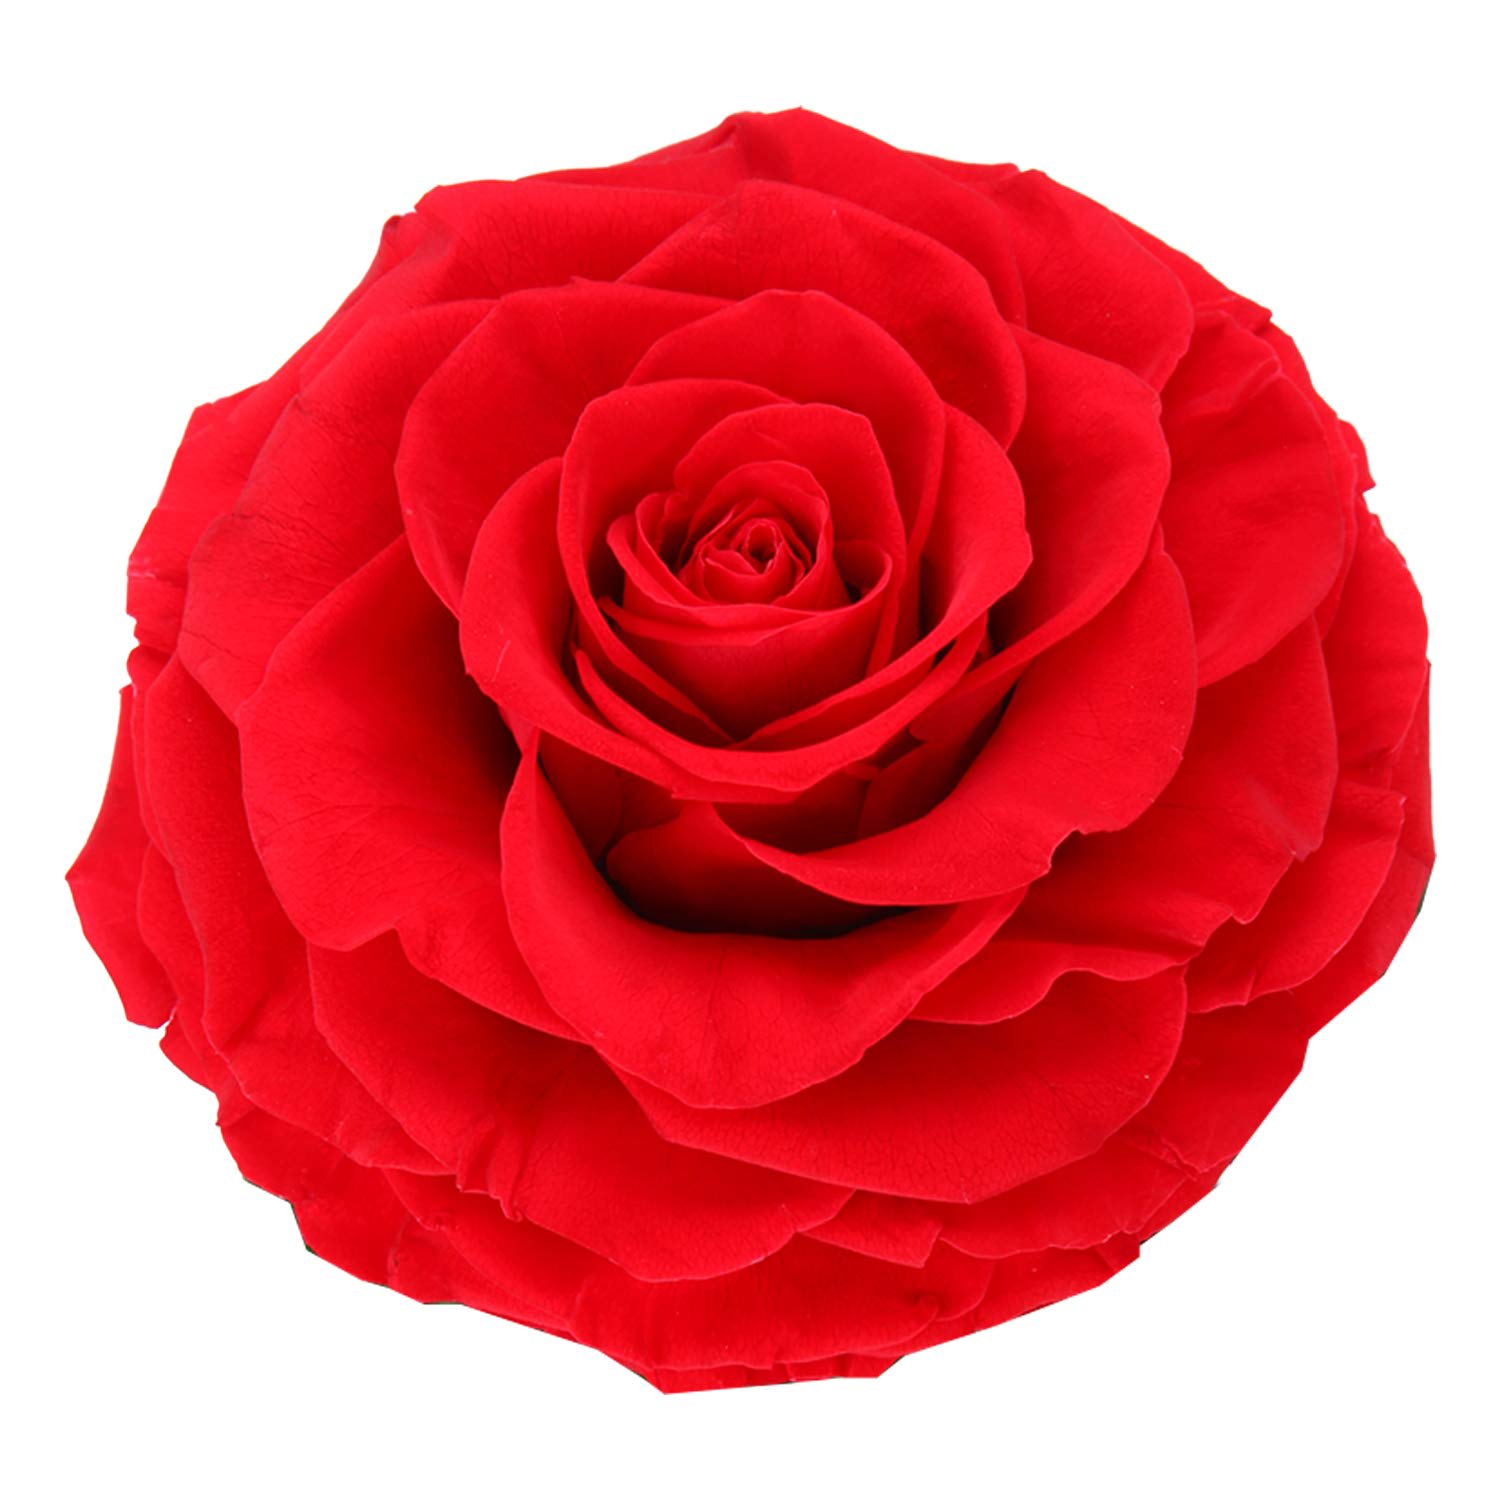 ETERNITY ROSE-RED in Bronx, NY | WORLDTHEROSES.COM